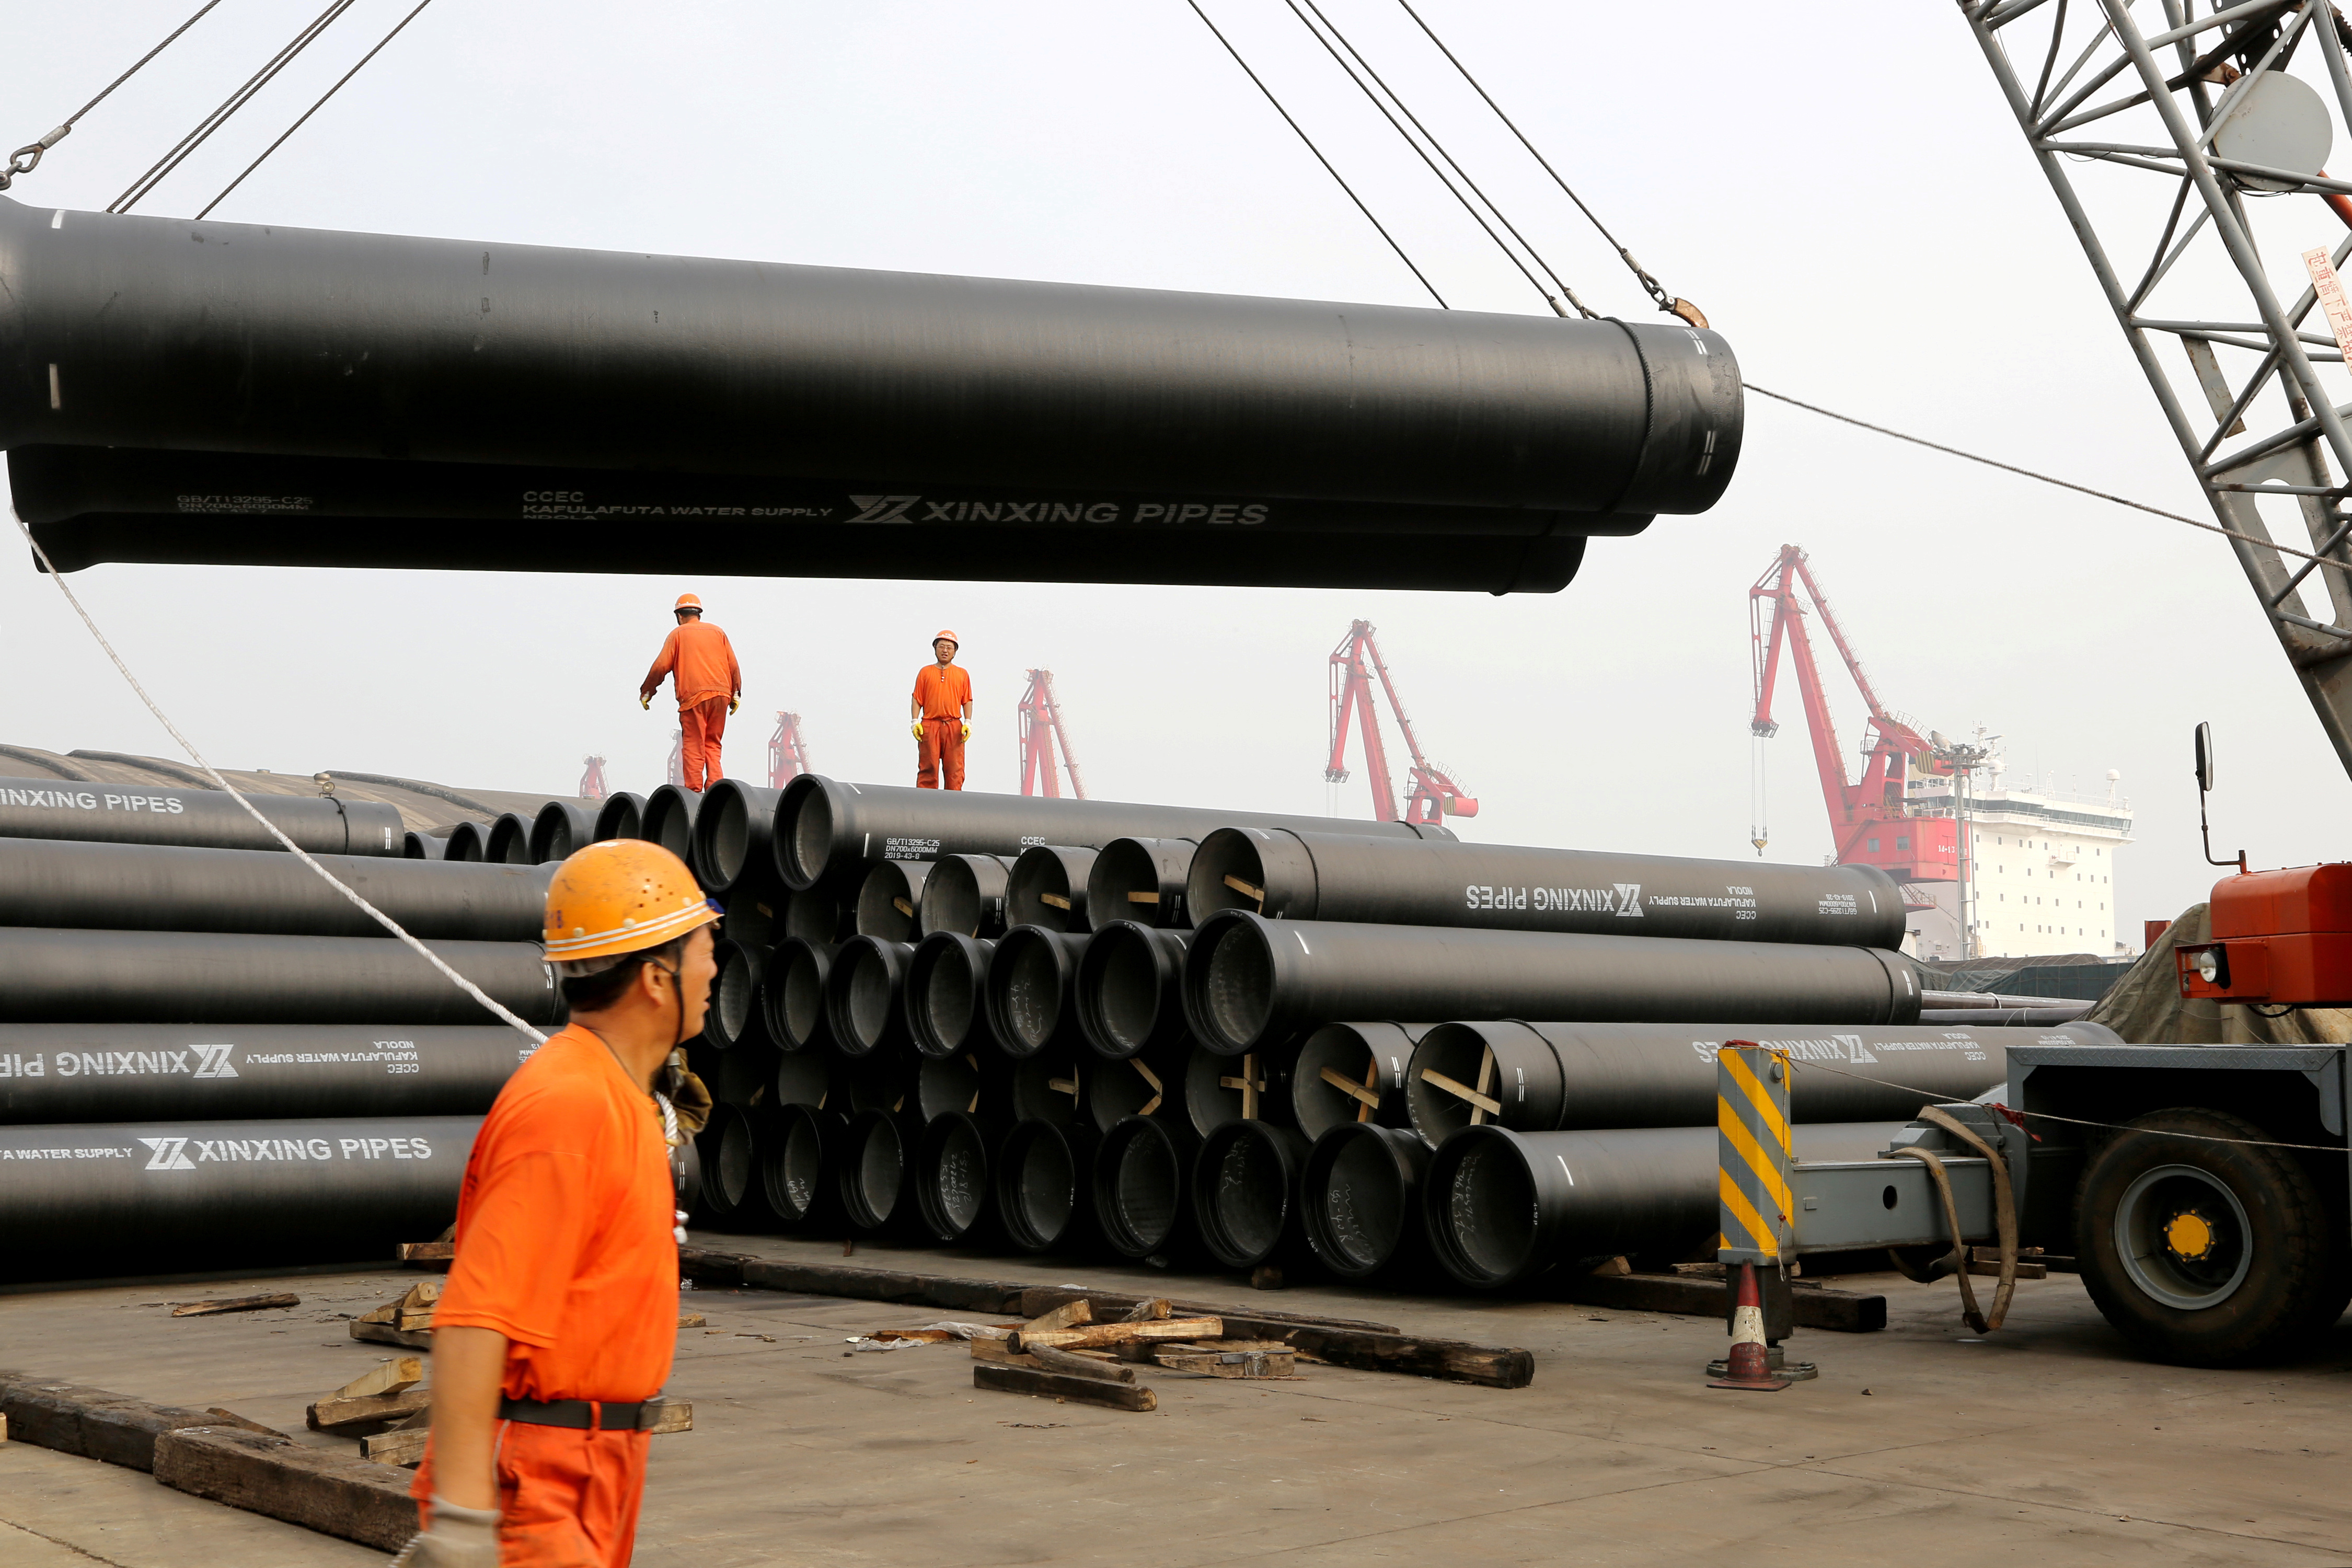 Workers direct a crane lifting ductile iron pipes for export at a port in Lianyungang, Jiangsu